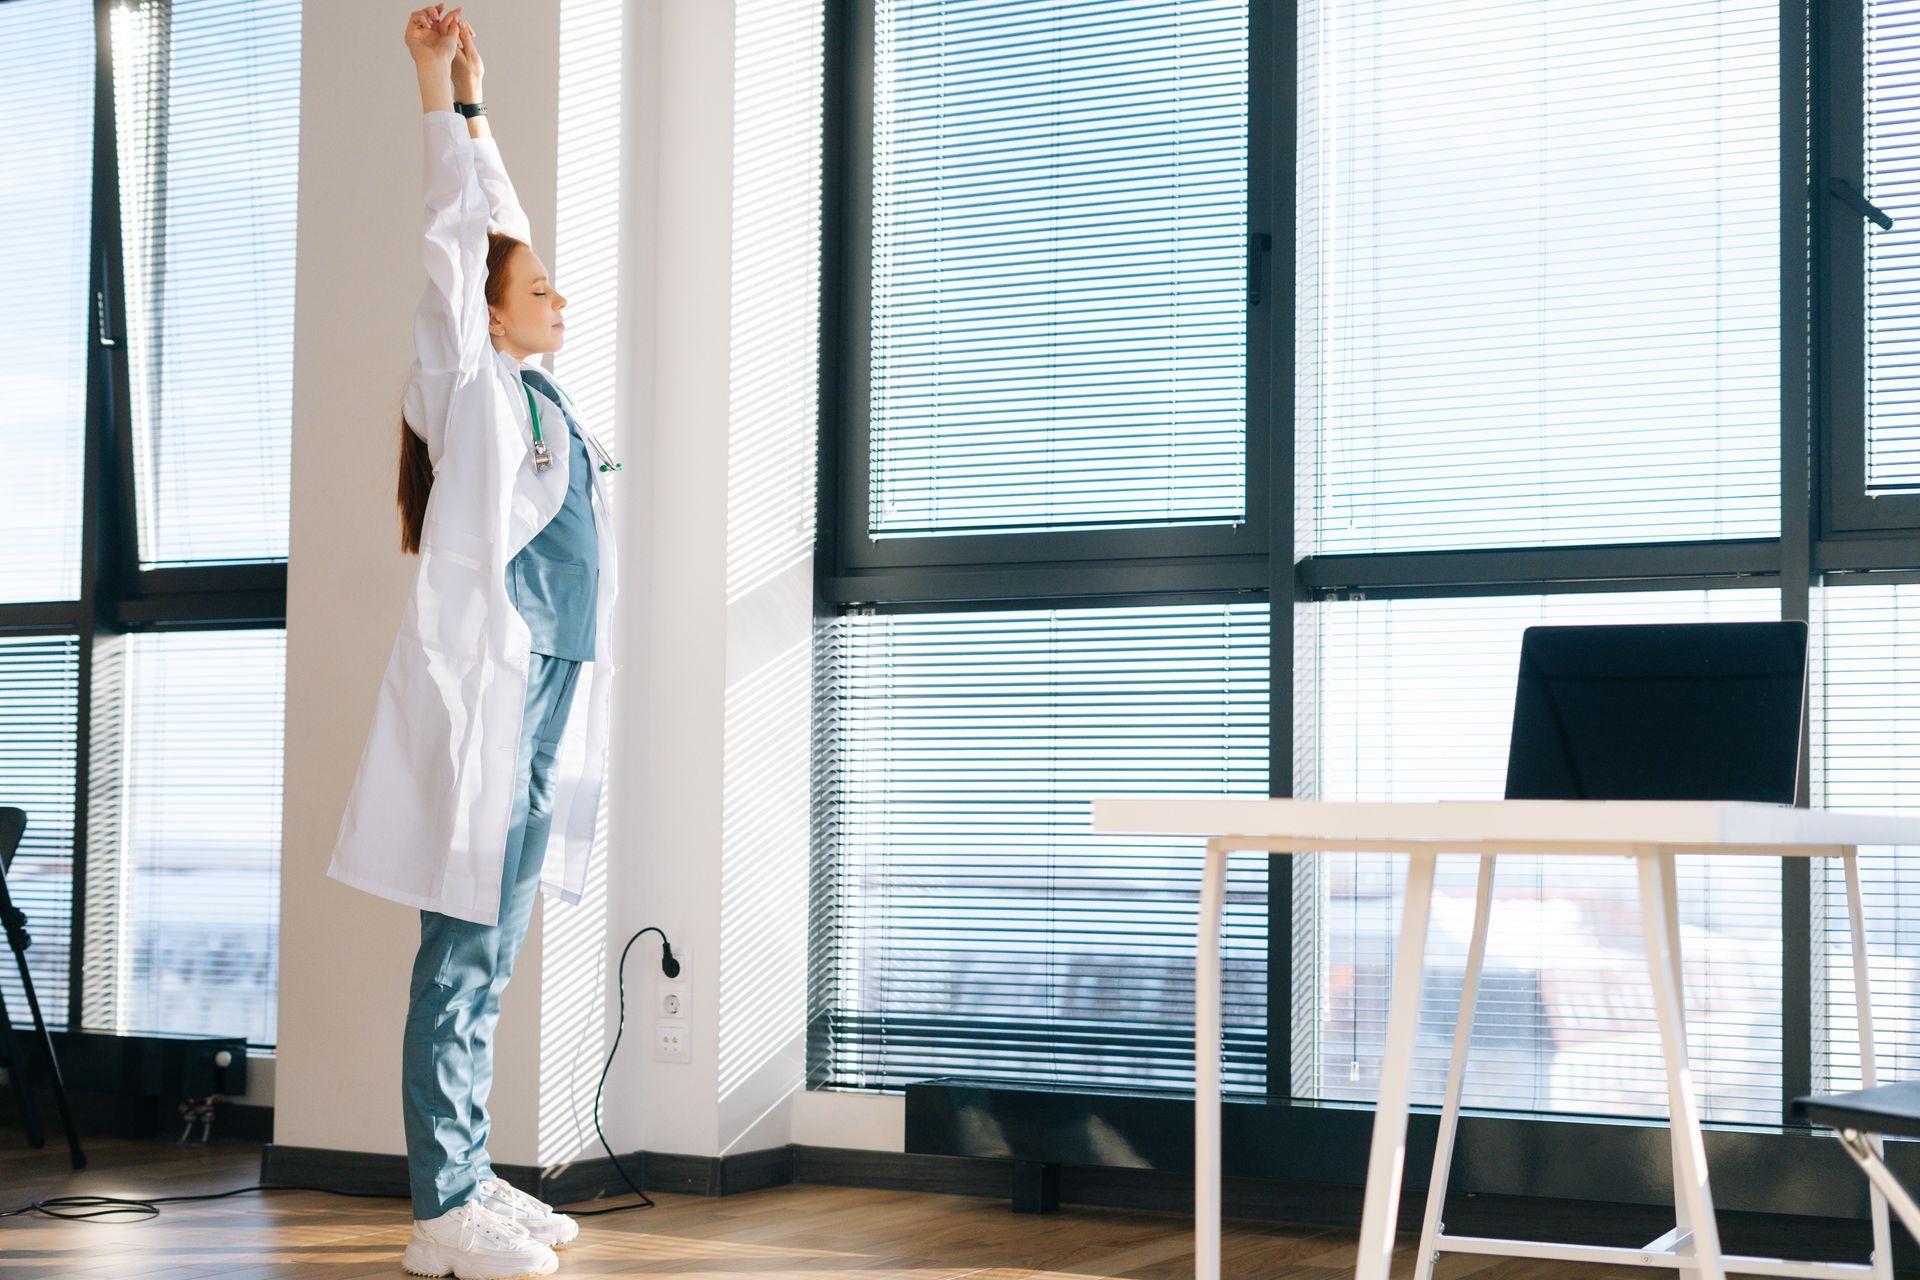 A female doctor is stretching her arms in an office to encourage her mental health.